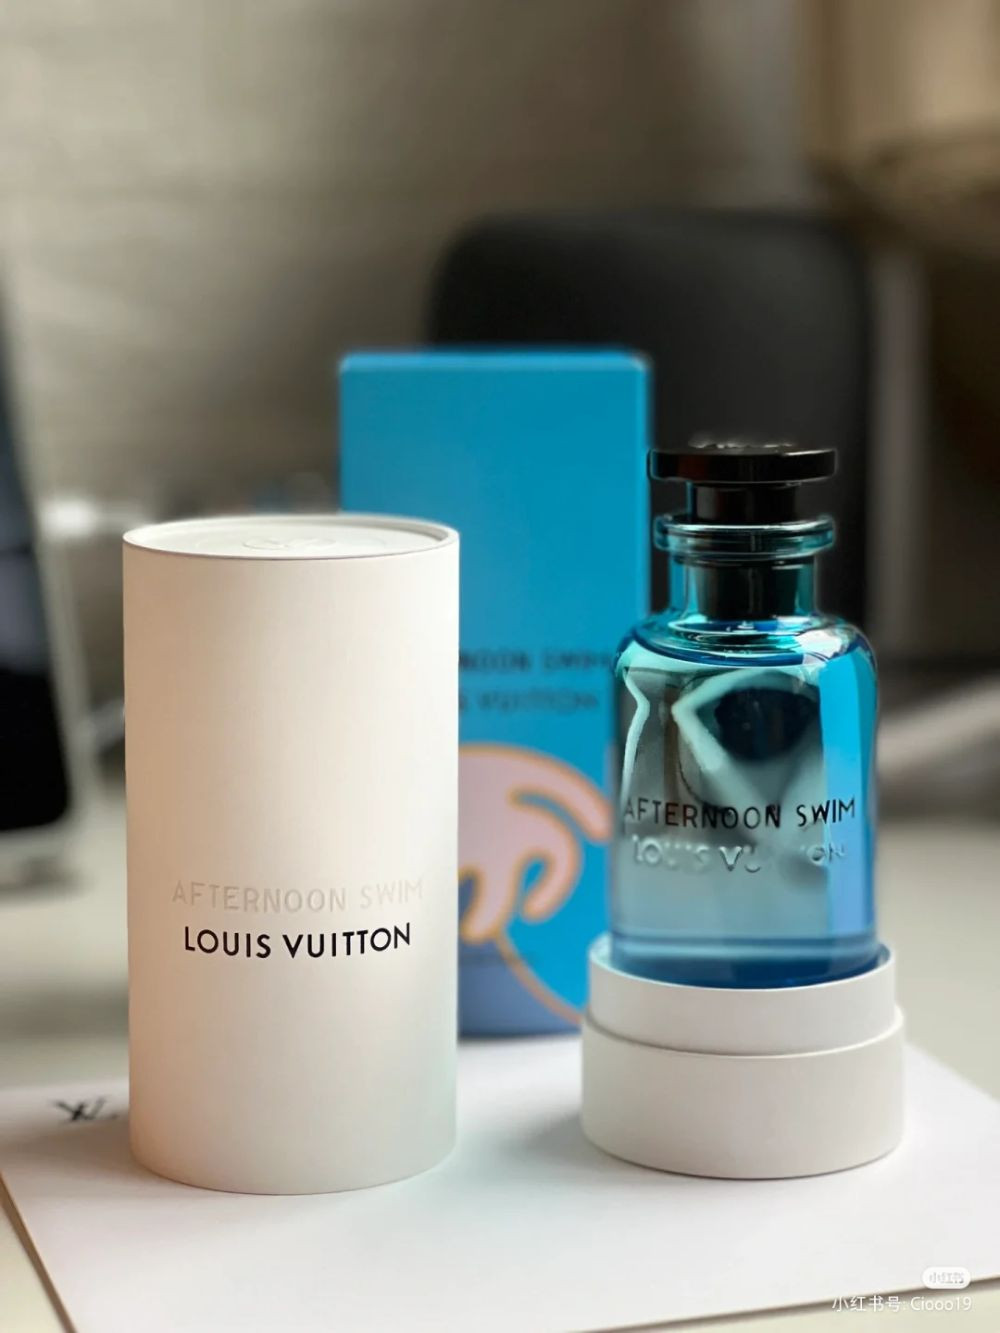 Louis Vuitton Afternoon Swim 100ml partial mens fragrance  wwwcolombiainglesefecom